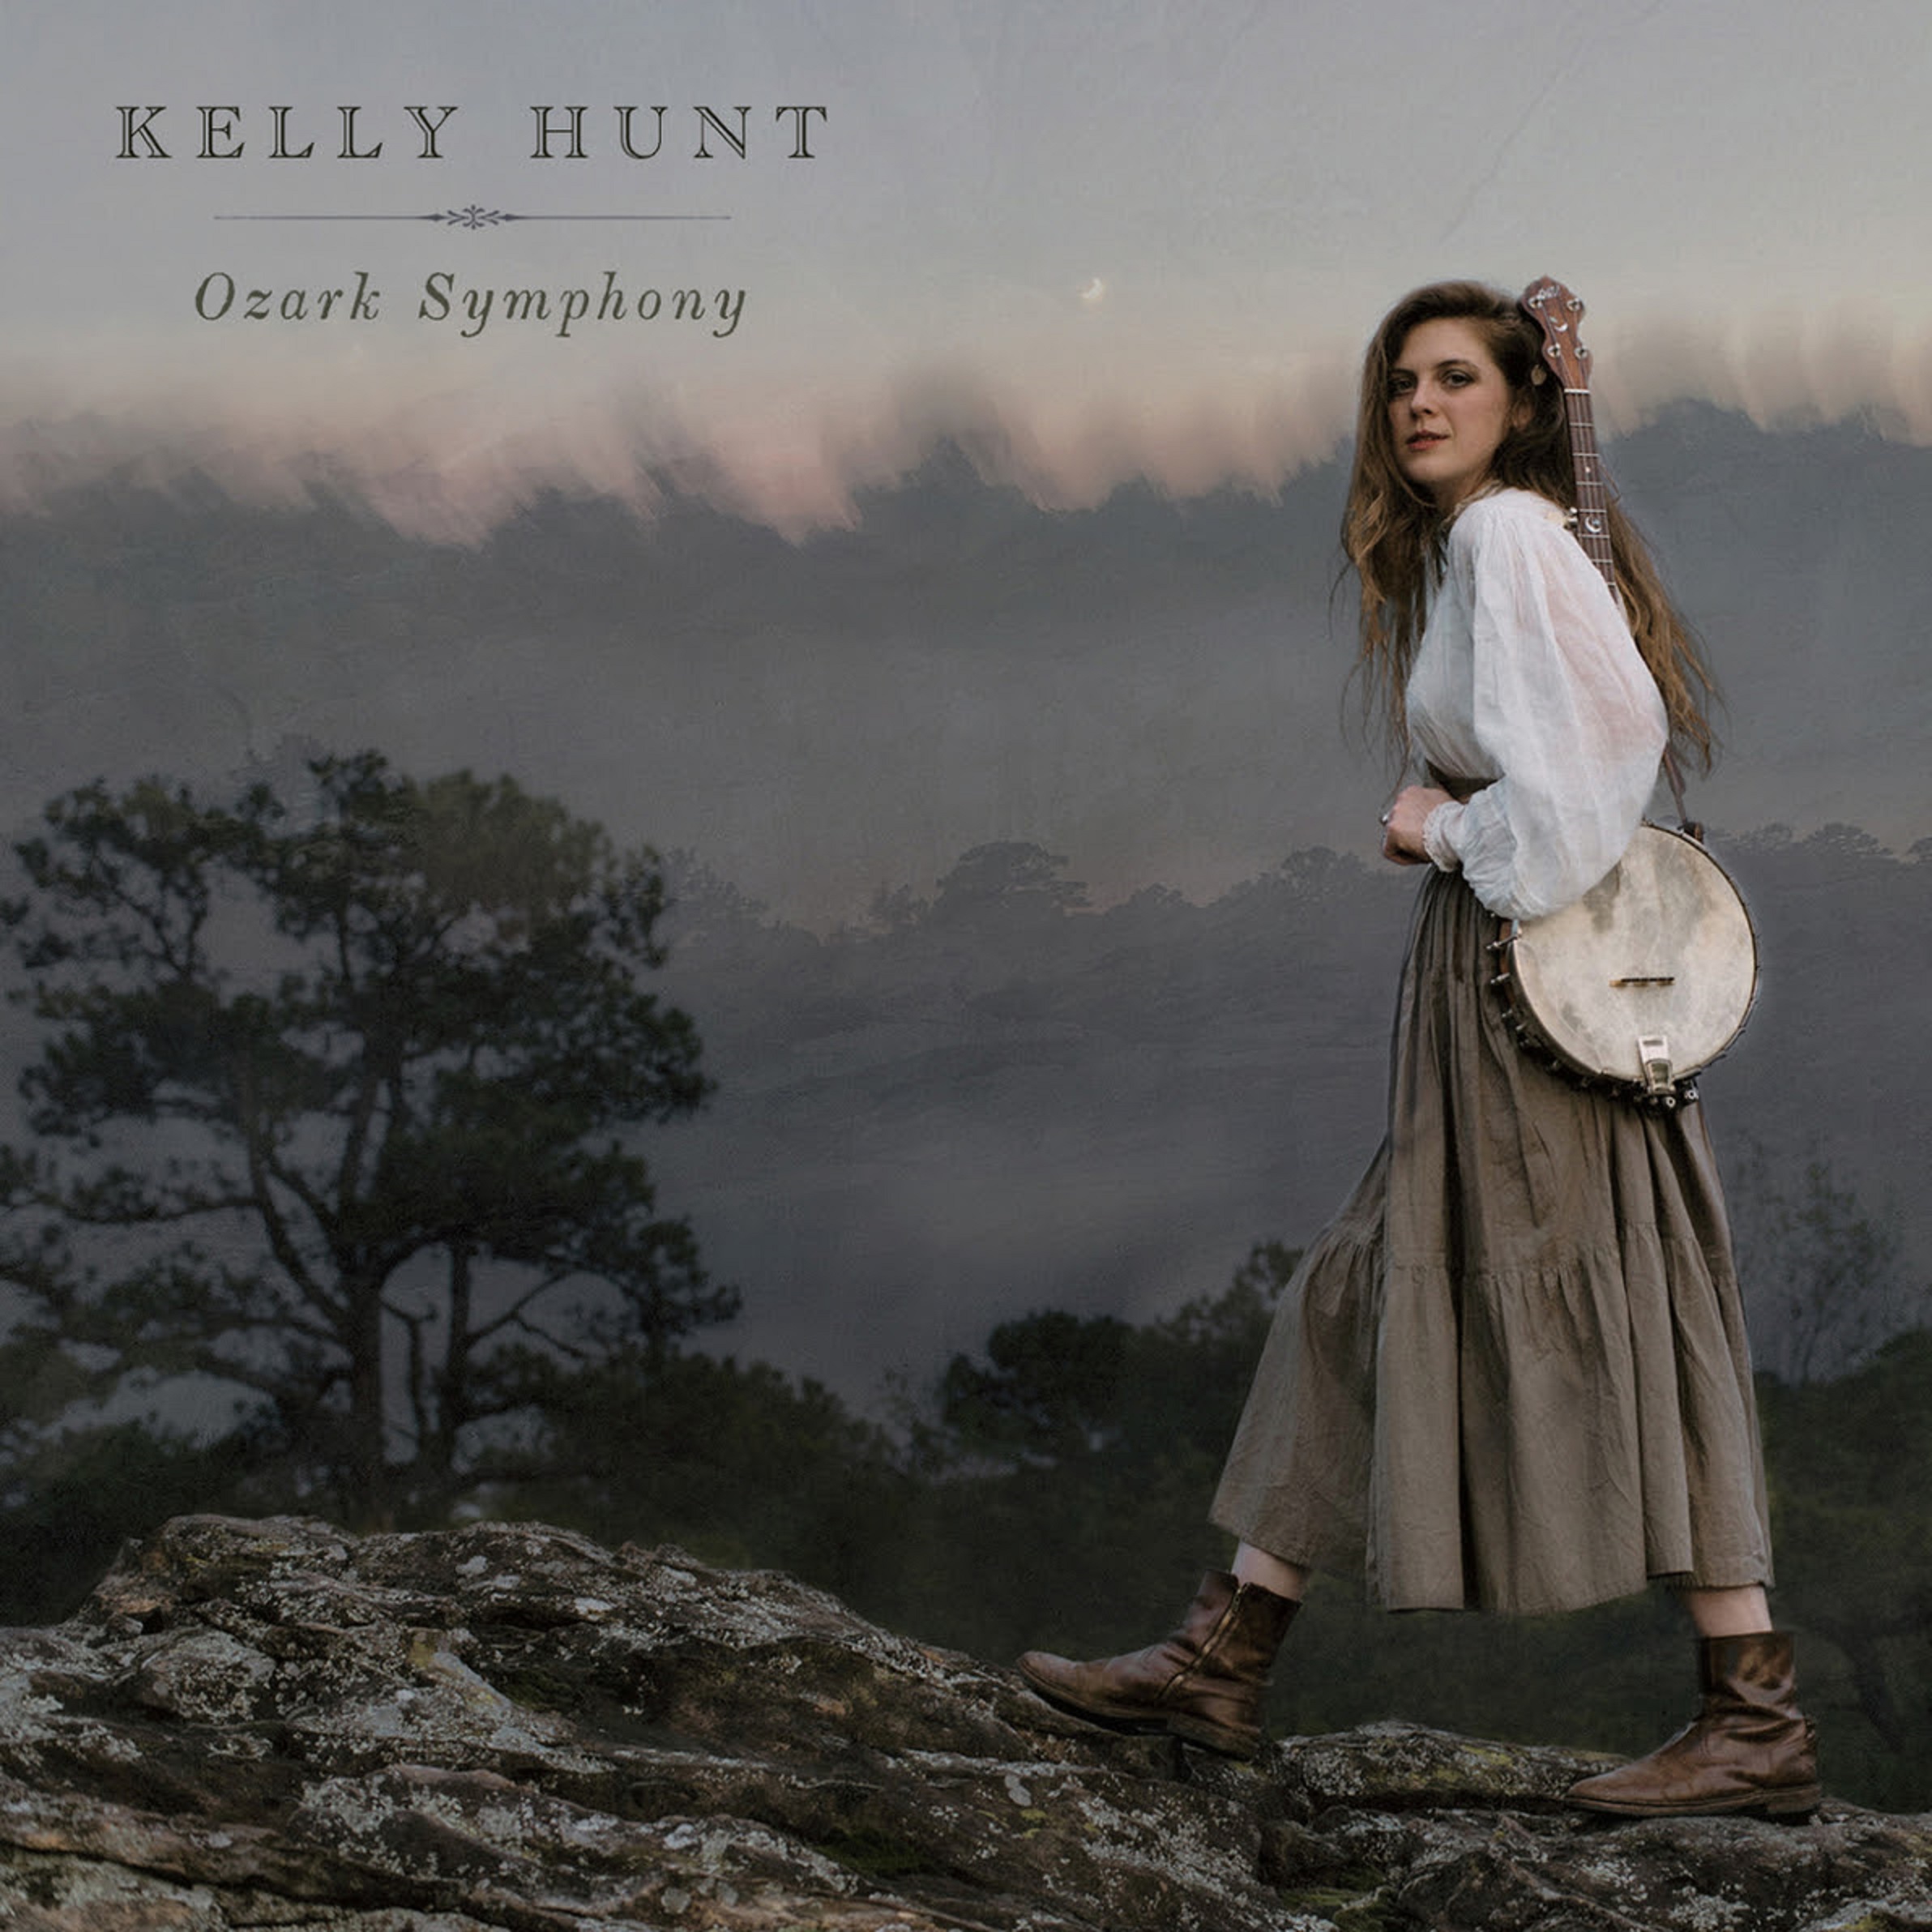 SINGER/SONGWRITER KELLY HUNT'S OZARK SYMPHONY OUT TODAY